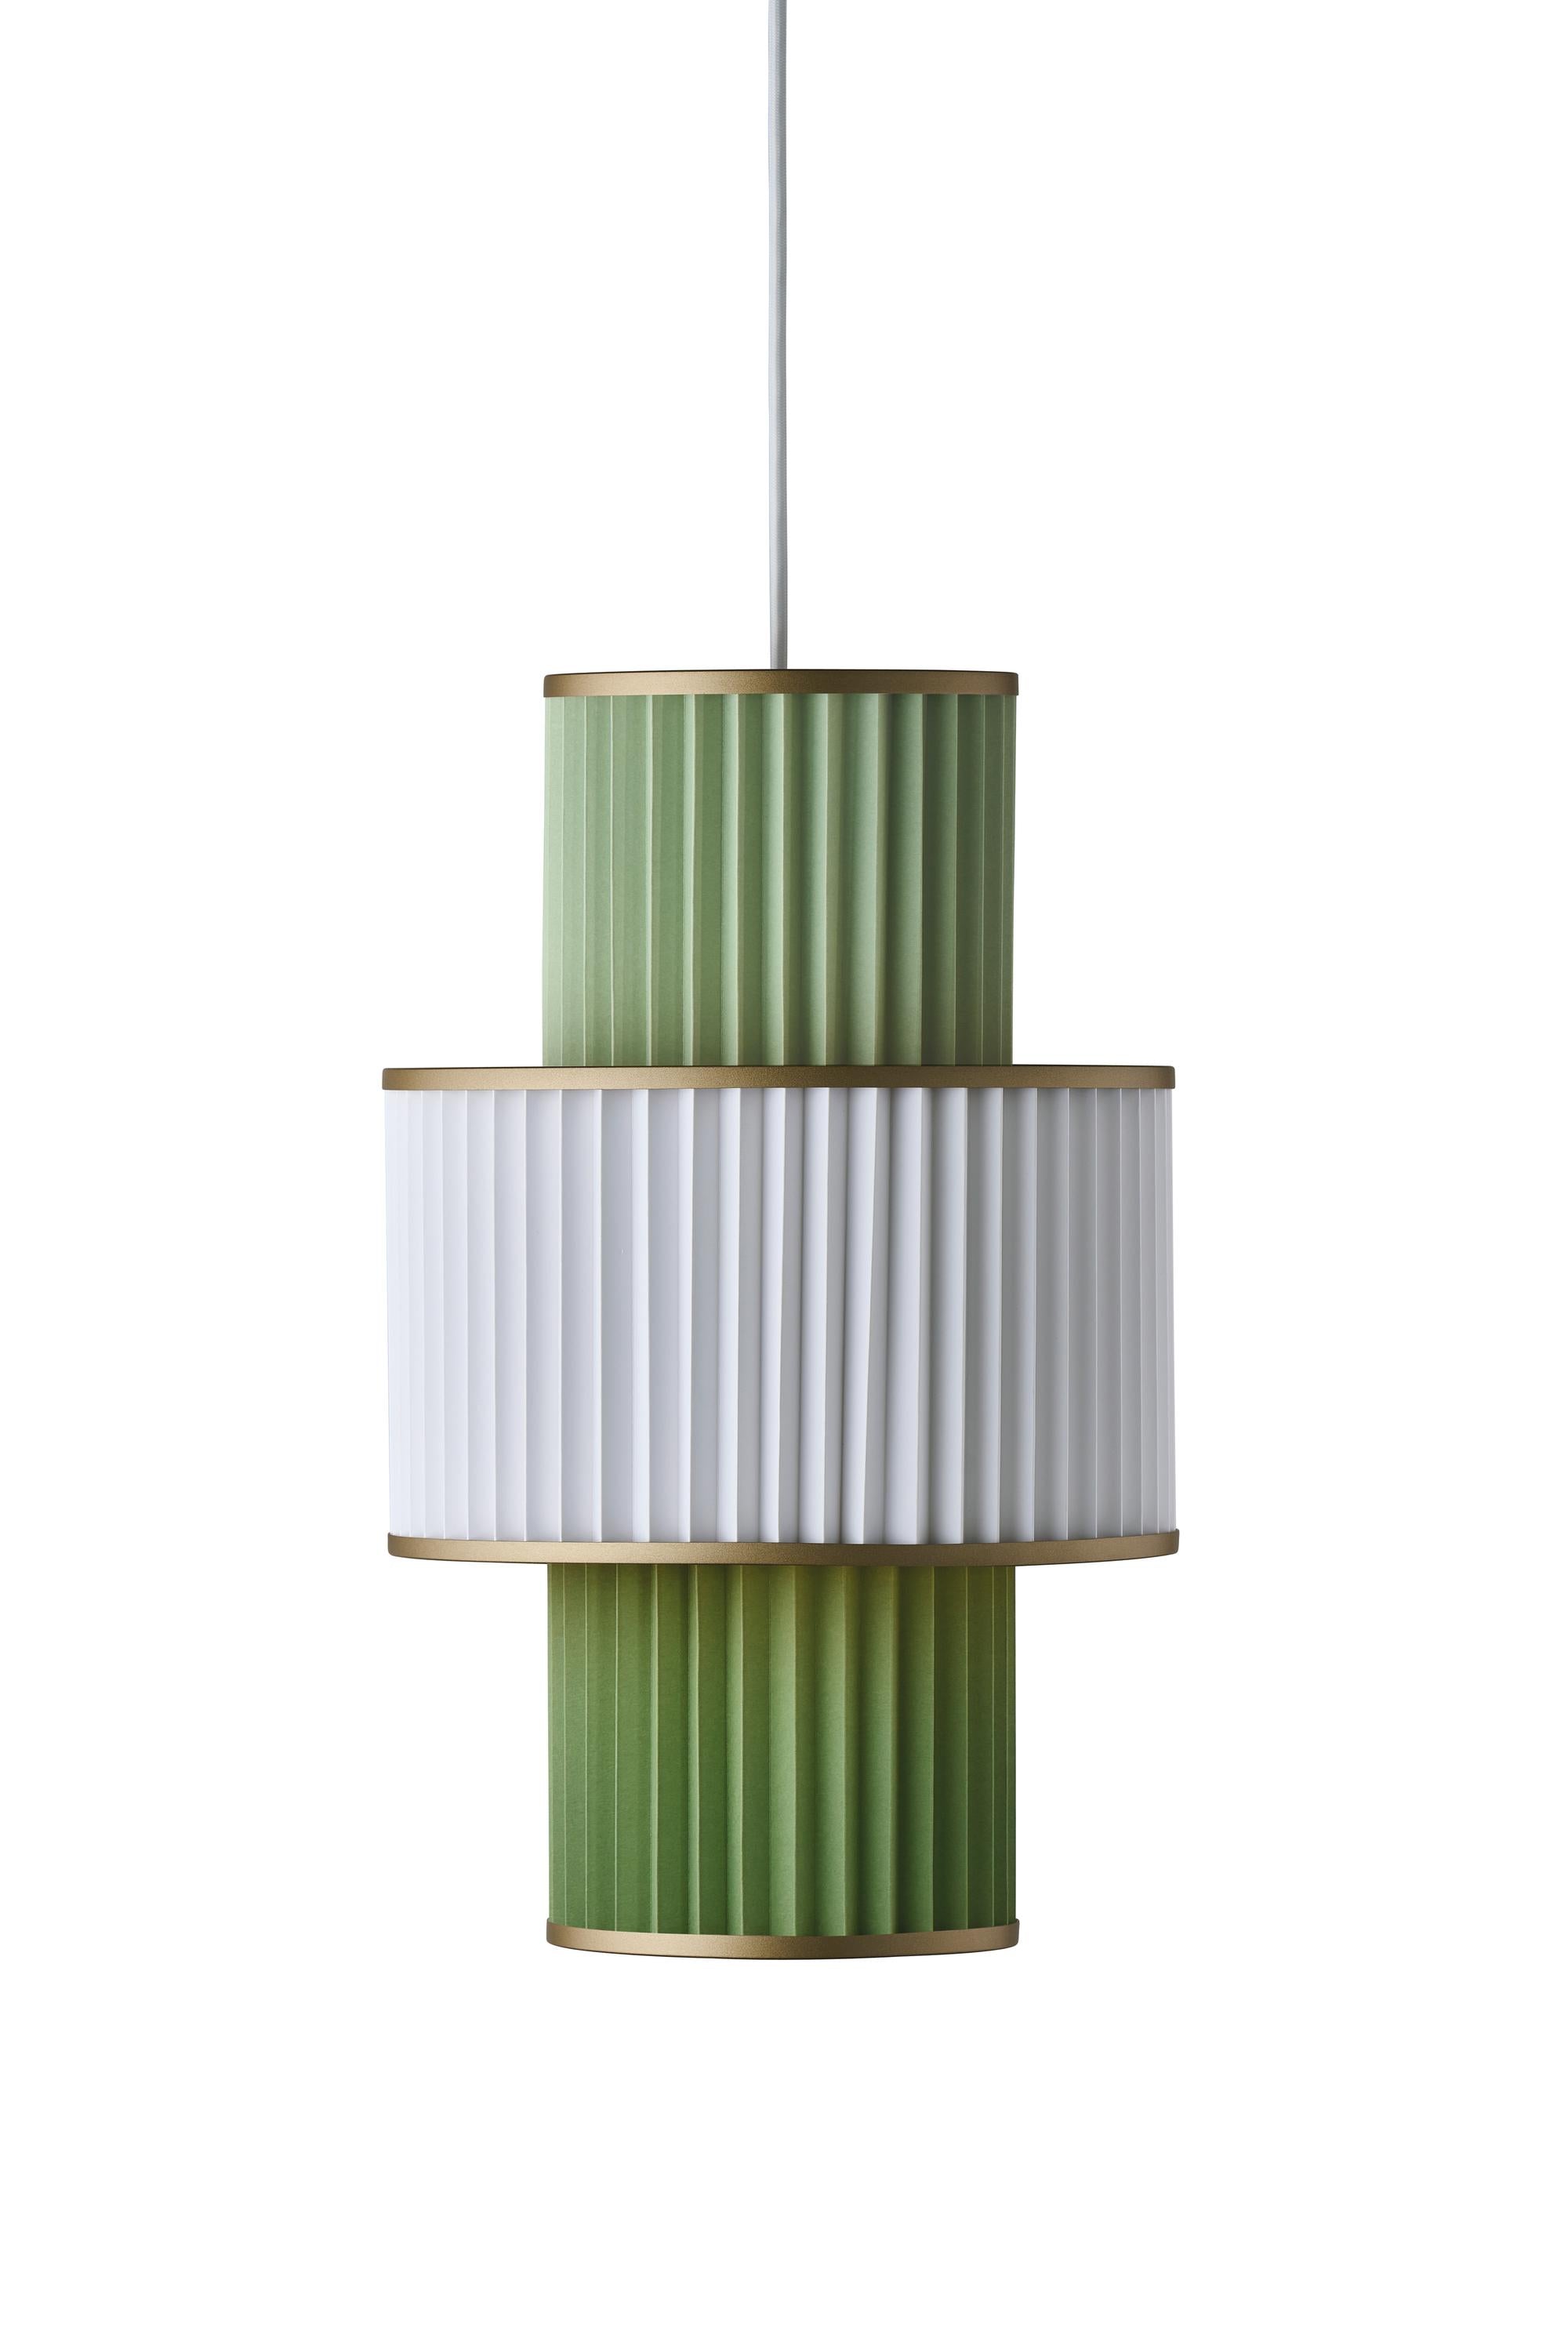 Le Klint Plivello Suspension Lamp Golden/White/Light Green With 3 Shades (S M S)